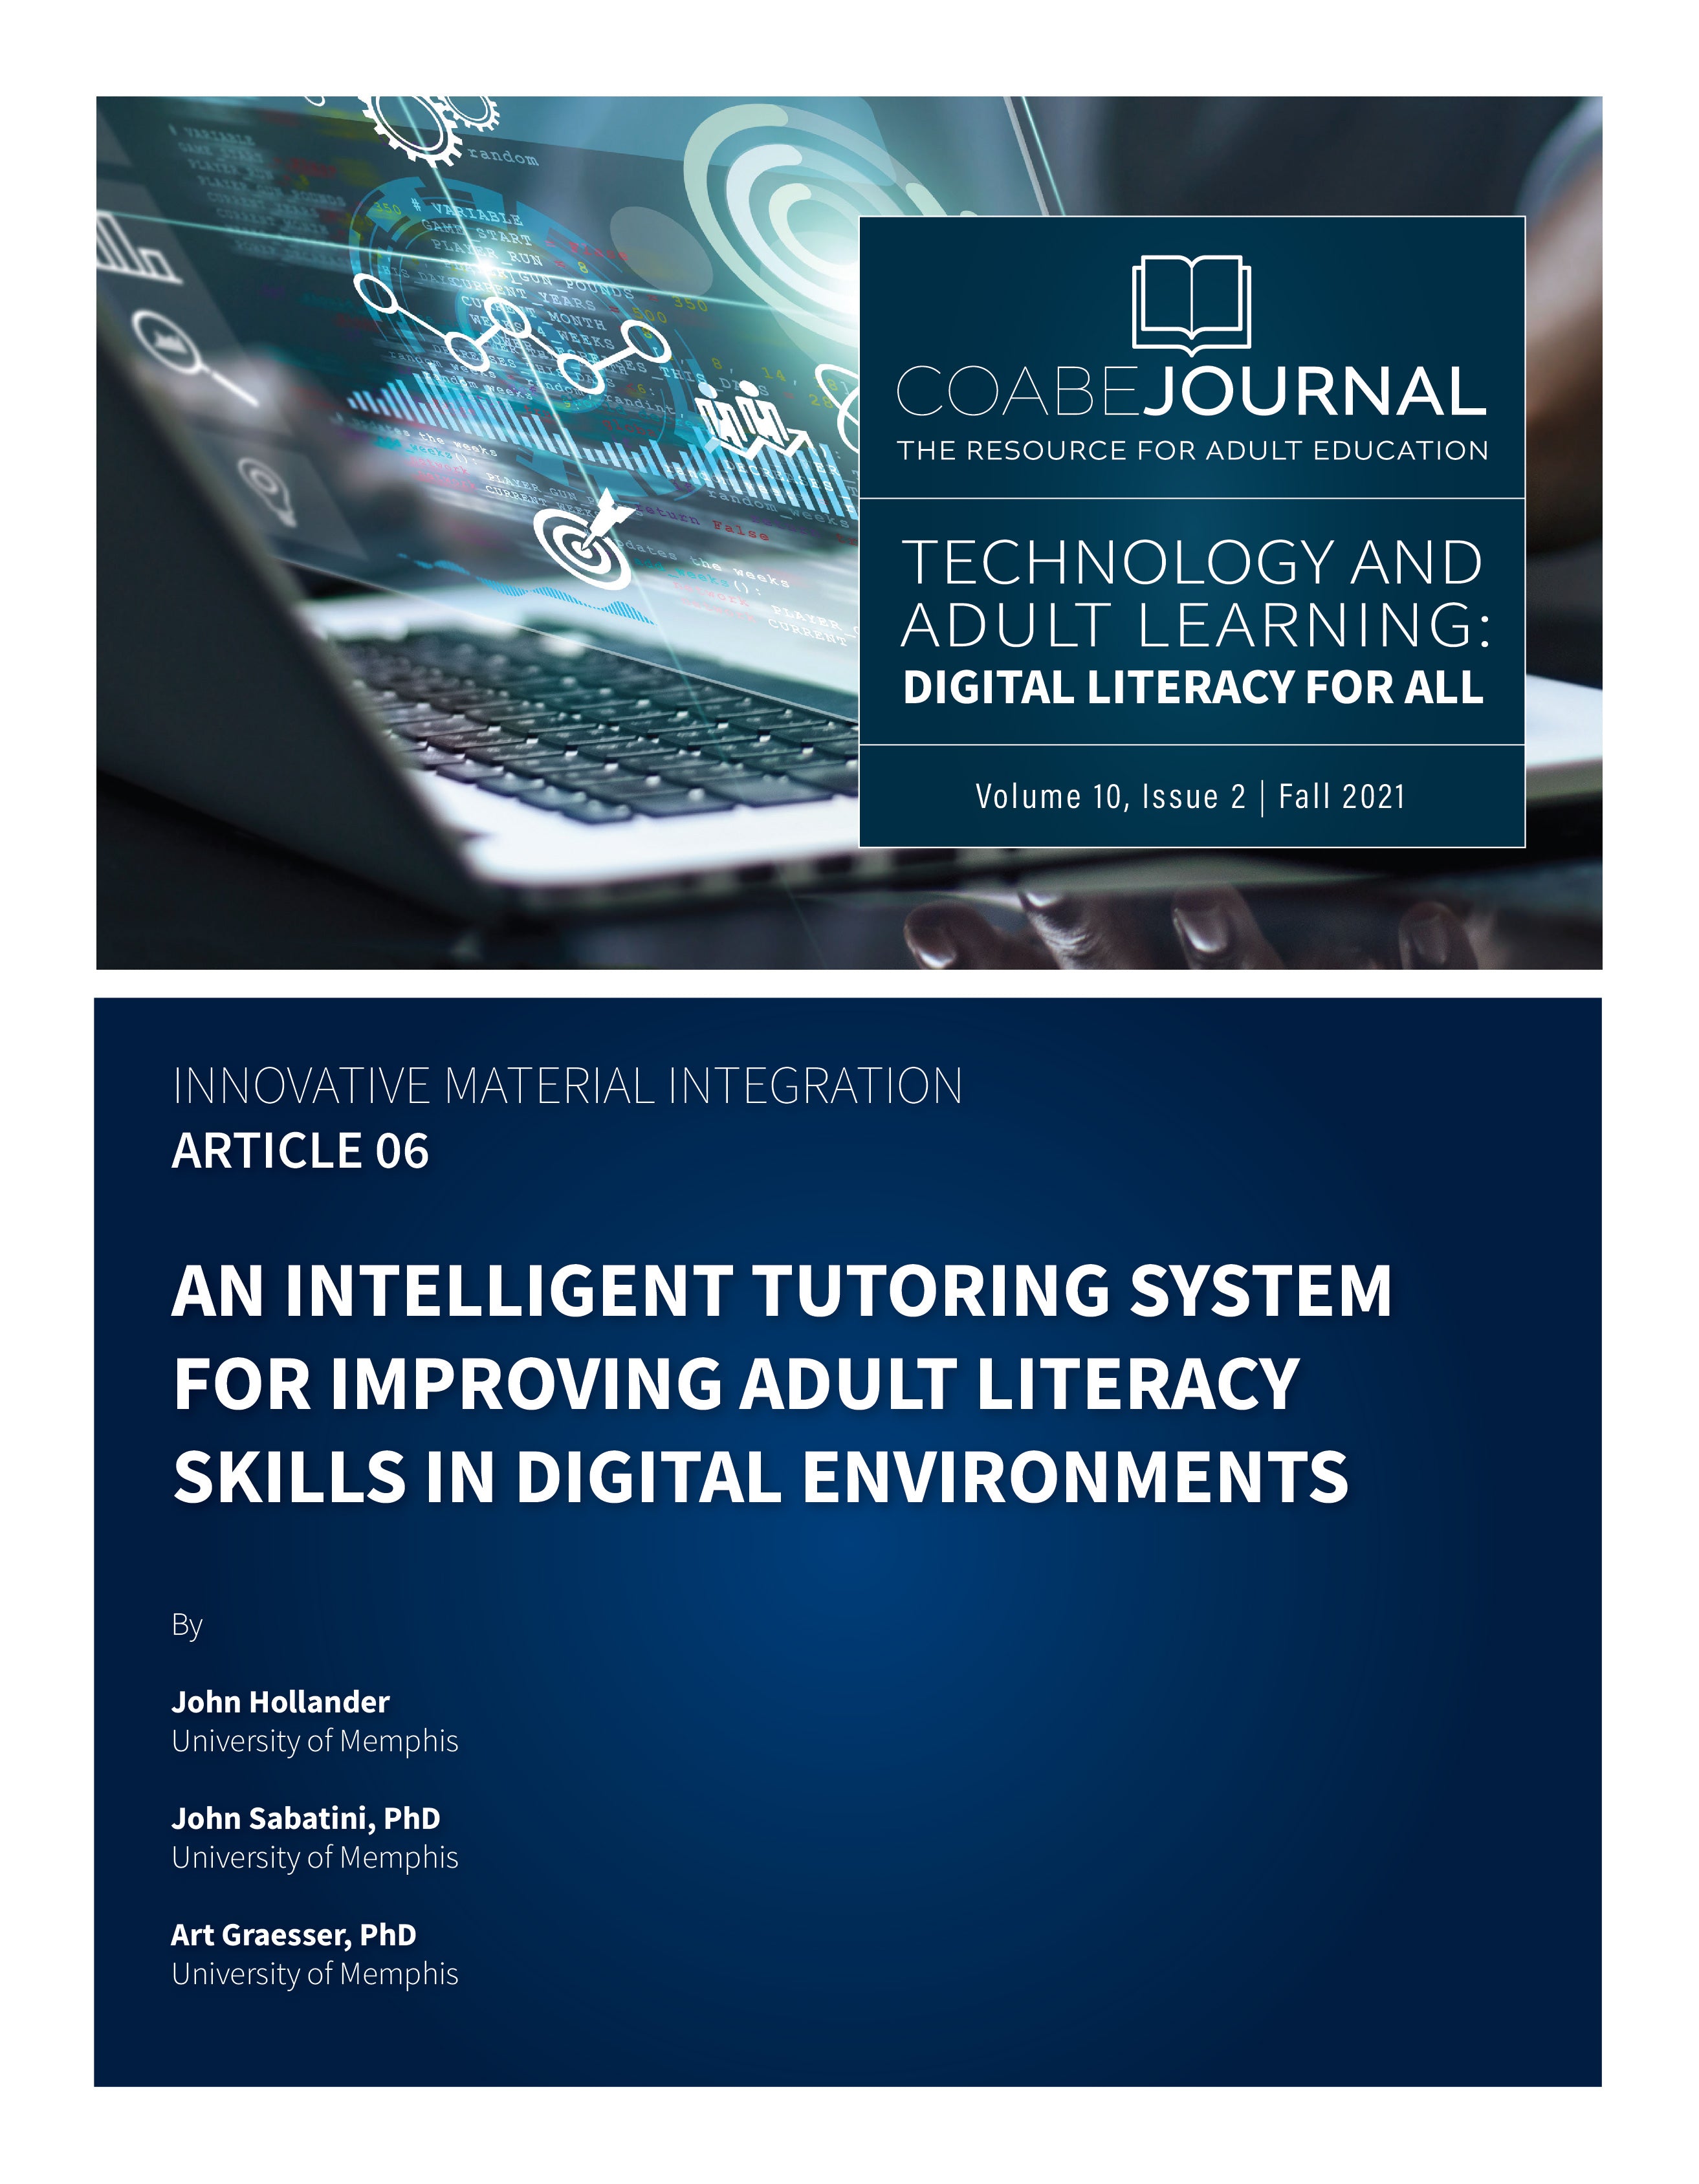 Article 06 | An Intelligent Tutoring System For Improving Adult Literacy Skills In Digital Environments